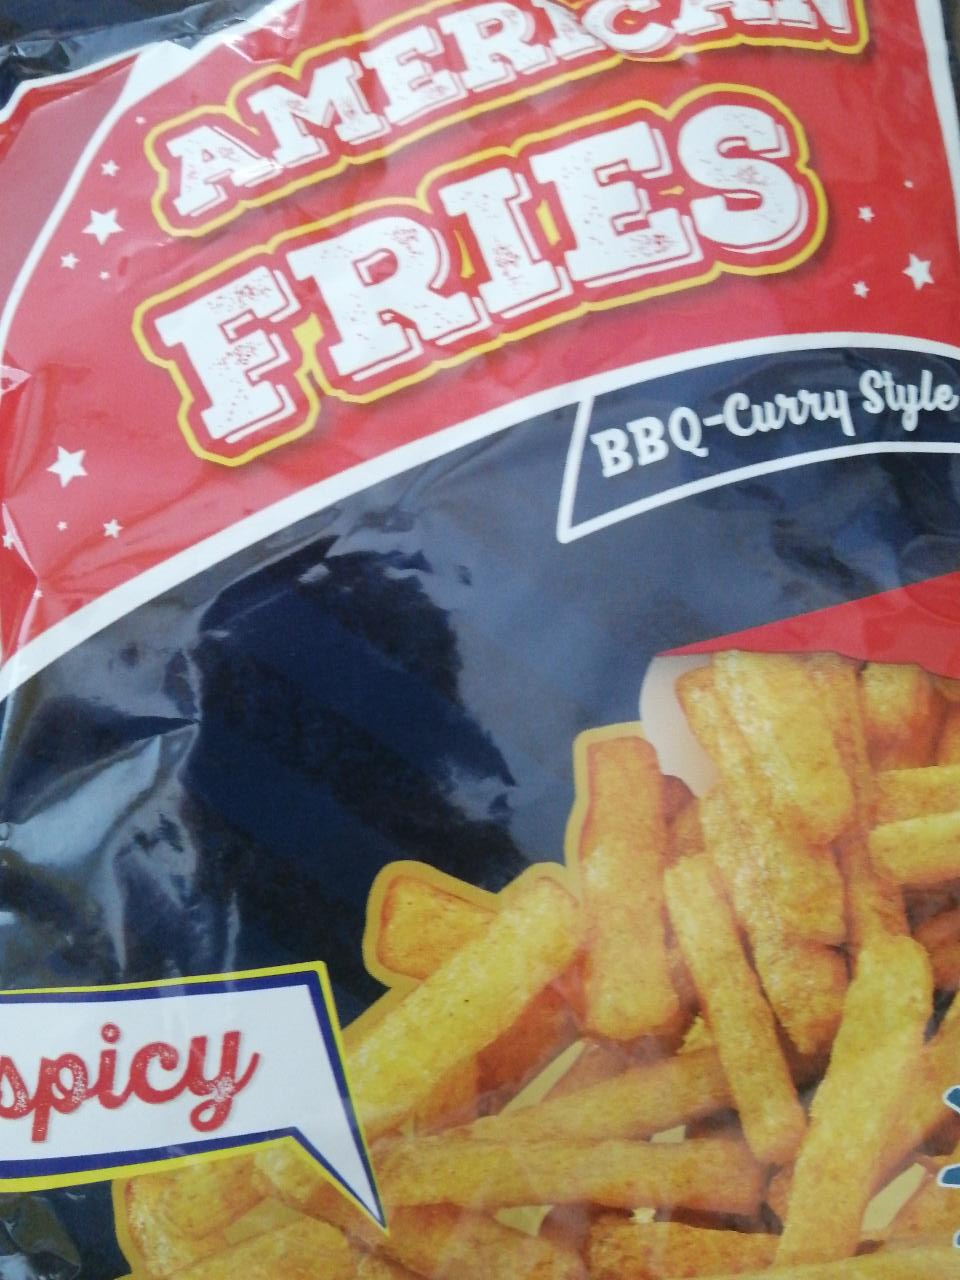 Fotografie - American fries BBG-curry style spicy